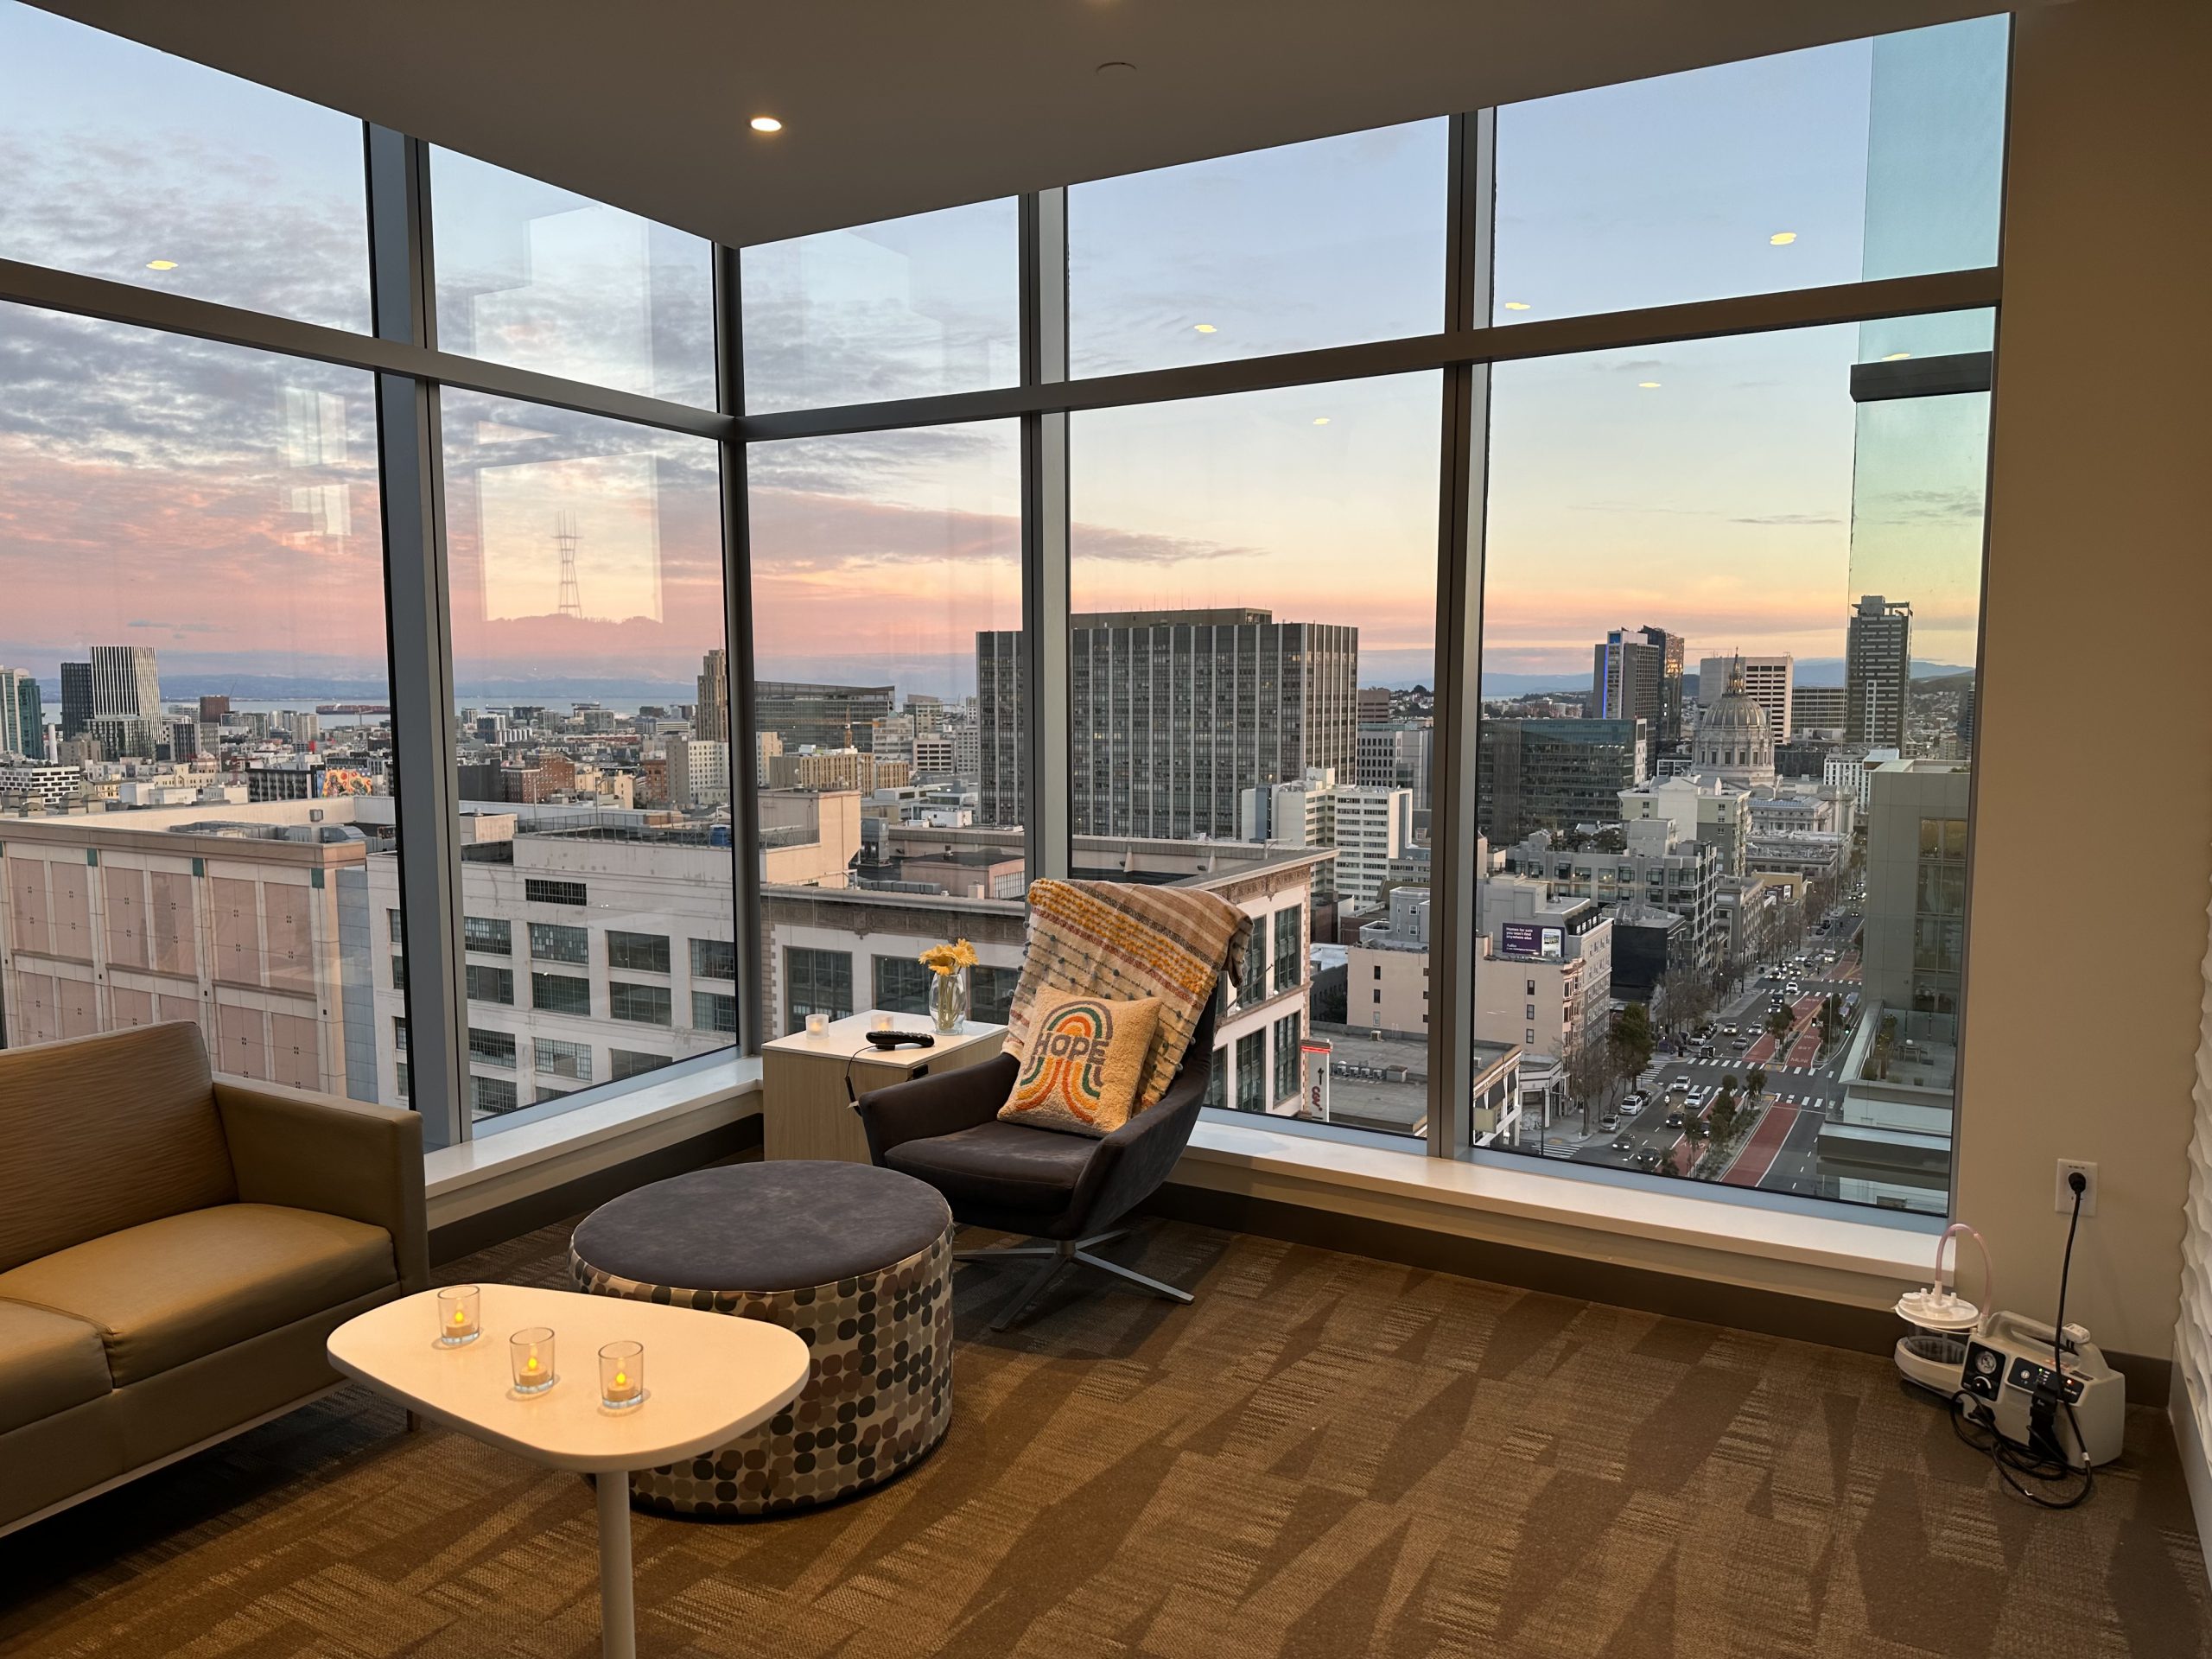 A hospital patient and family lounge with floor to ceiling windows and city views of downtown San Francisco.